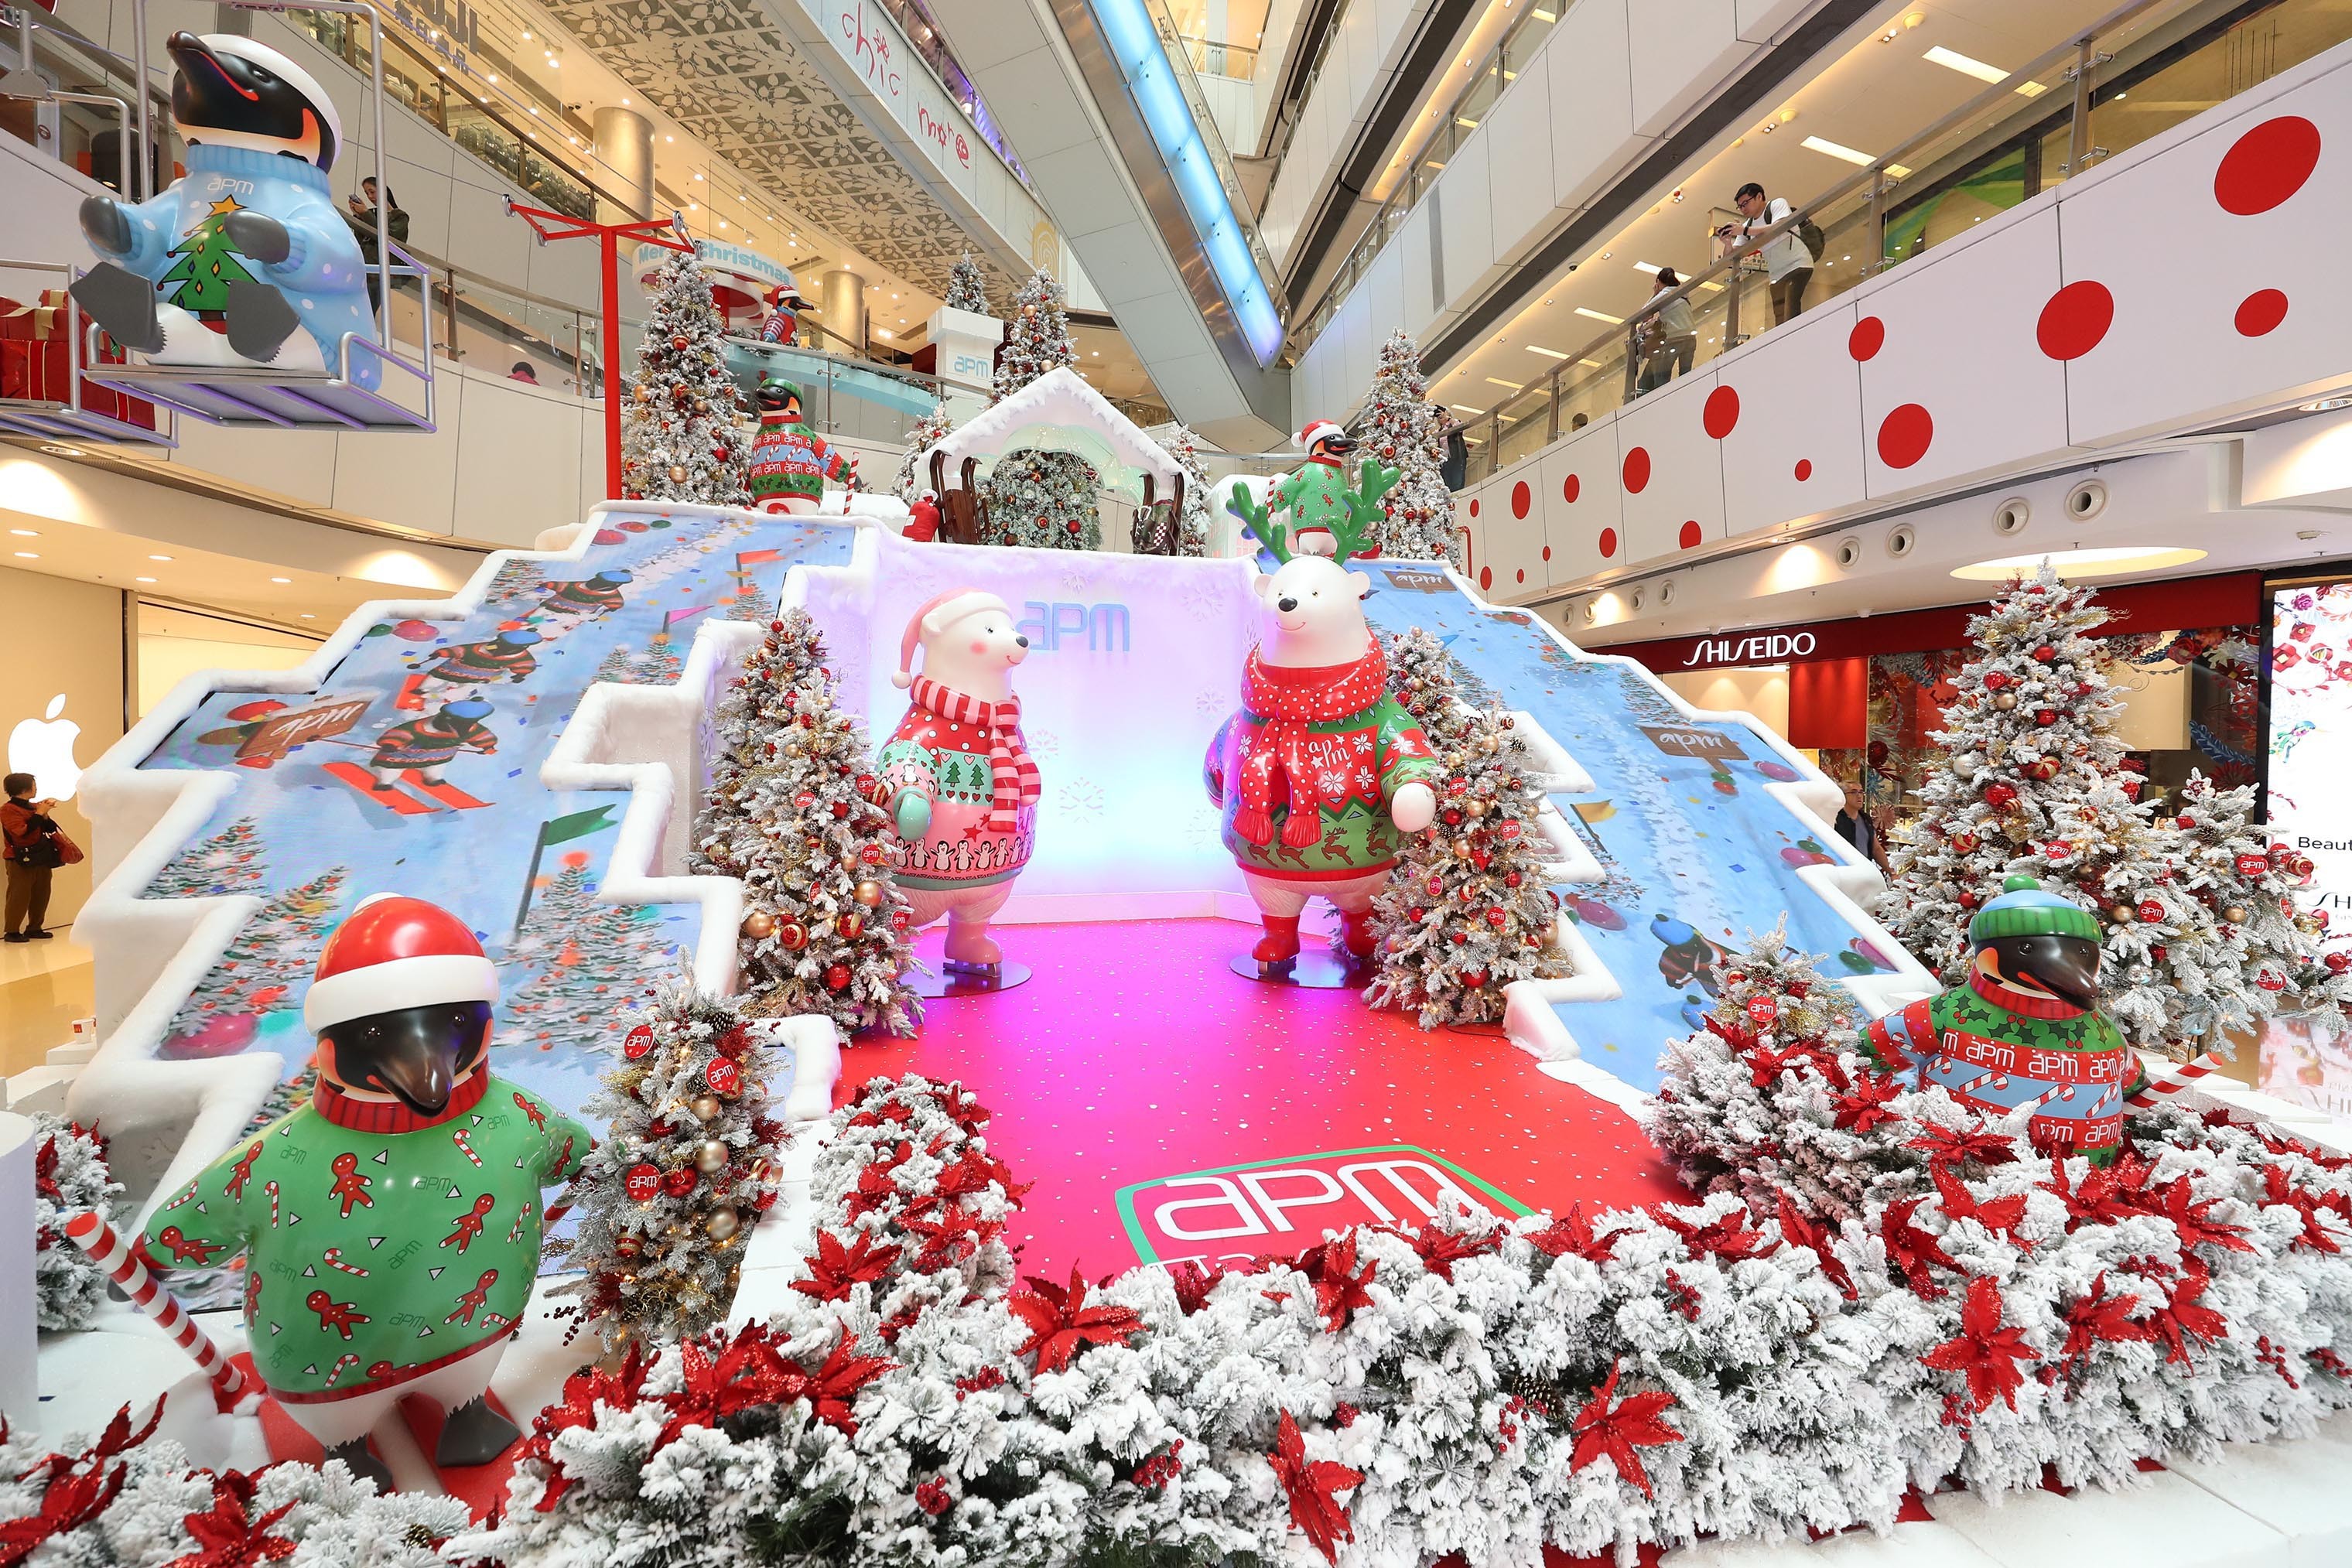 The APM shopping centre in Kwun Tong made use of an elaborate decorative displays to attract 1.9 million visitors during the six-day period through December 26, a gain of 15 per cent on year. Photo: SCMP Handout